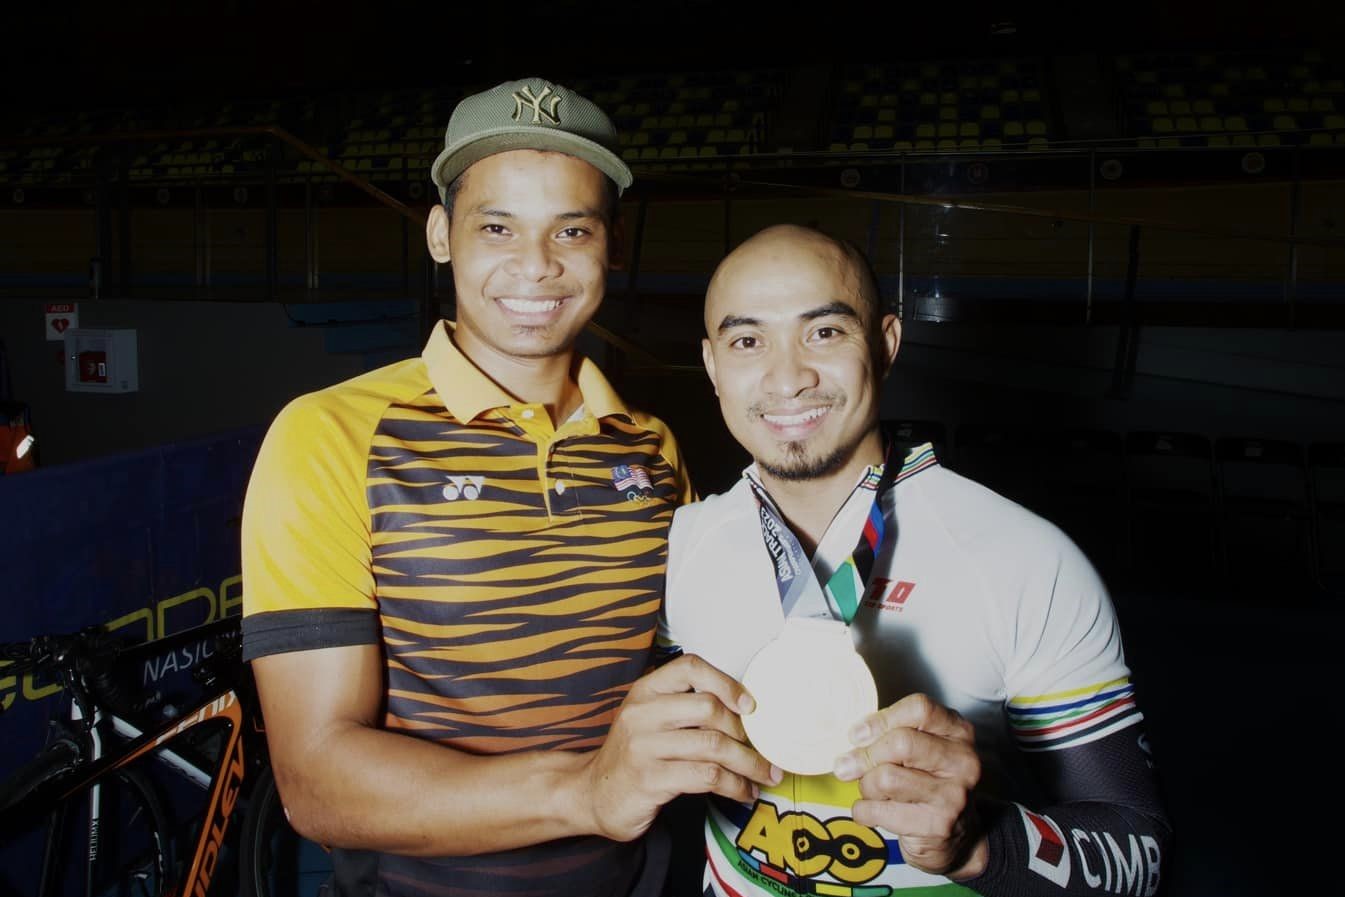 I tried to convince him, but health is a priority: Shah on Azizulhasni’s withdrawal